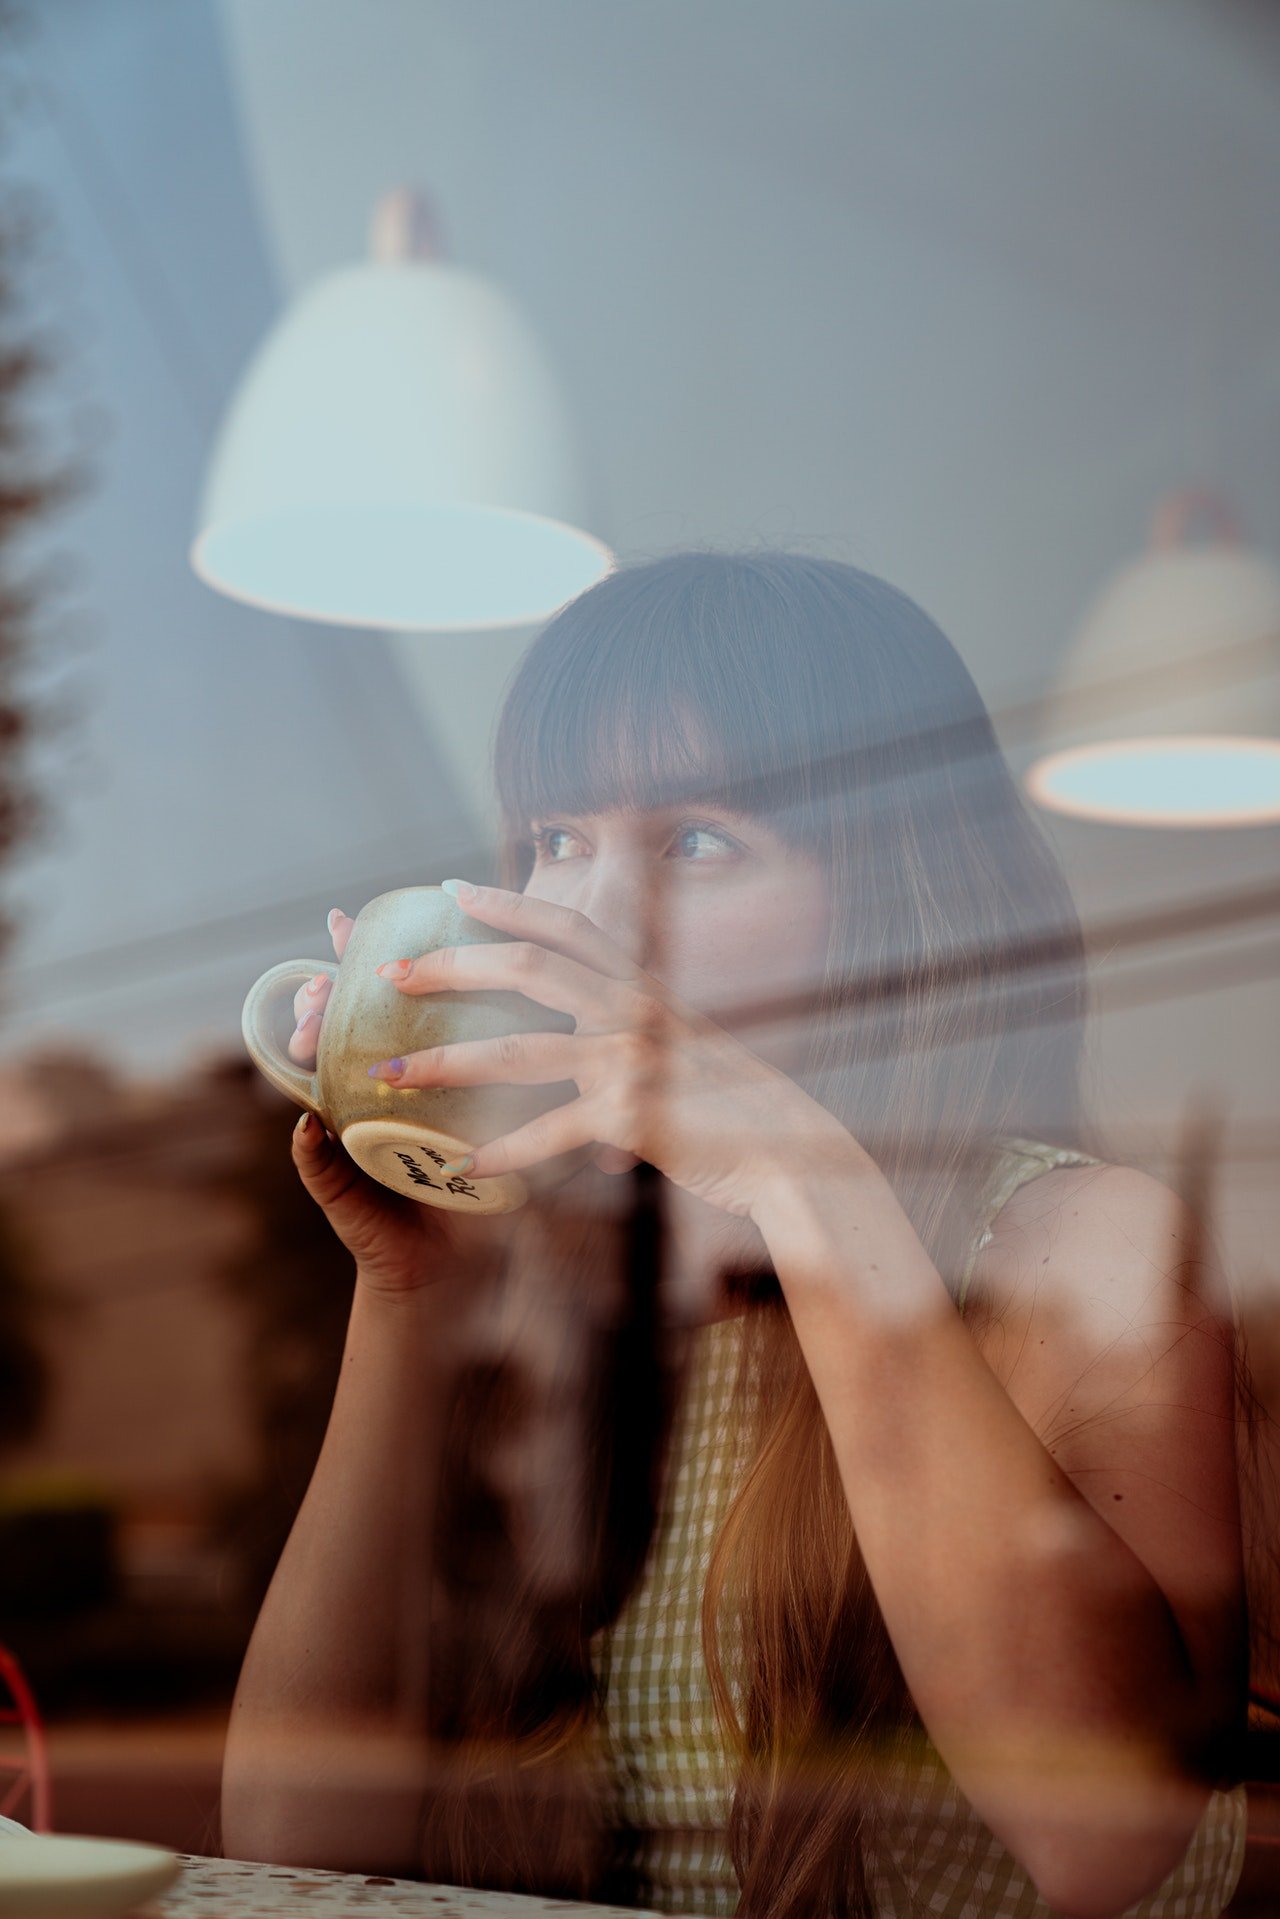 Victoria waited for her at their usual coffee shop. | Source: Pexels